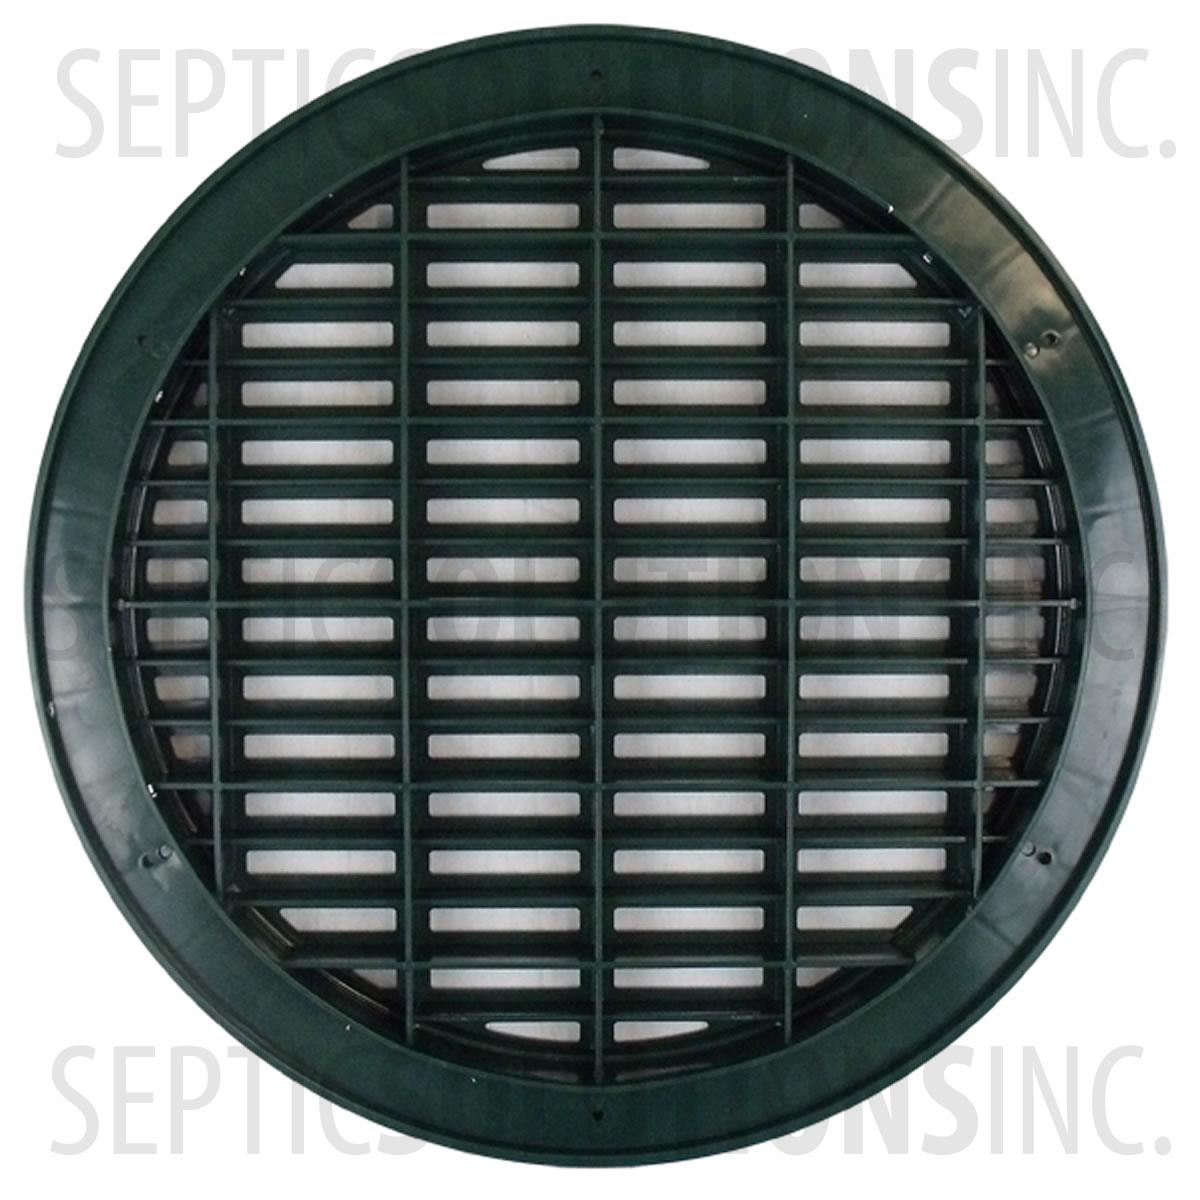 Polylok 18'' Heavy Duty Grate Cover for Corrugated Pipe